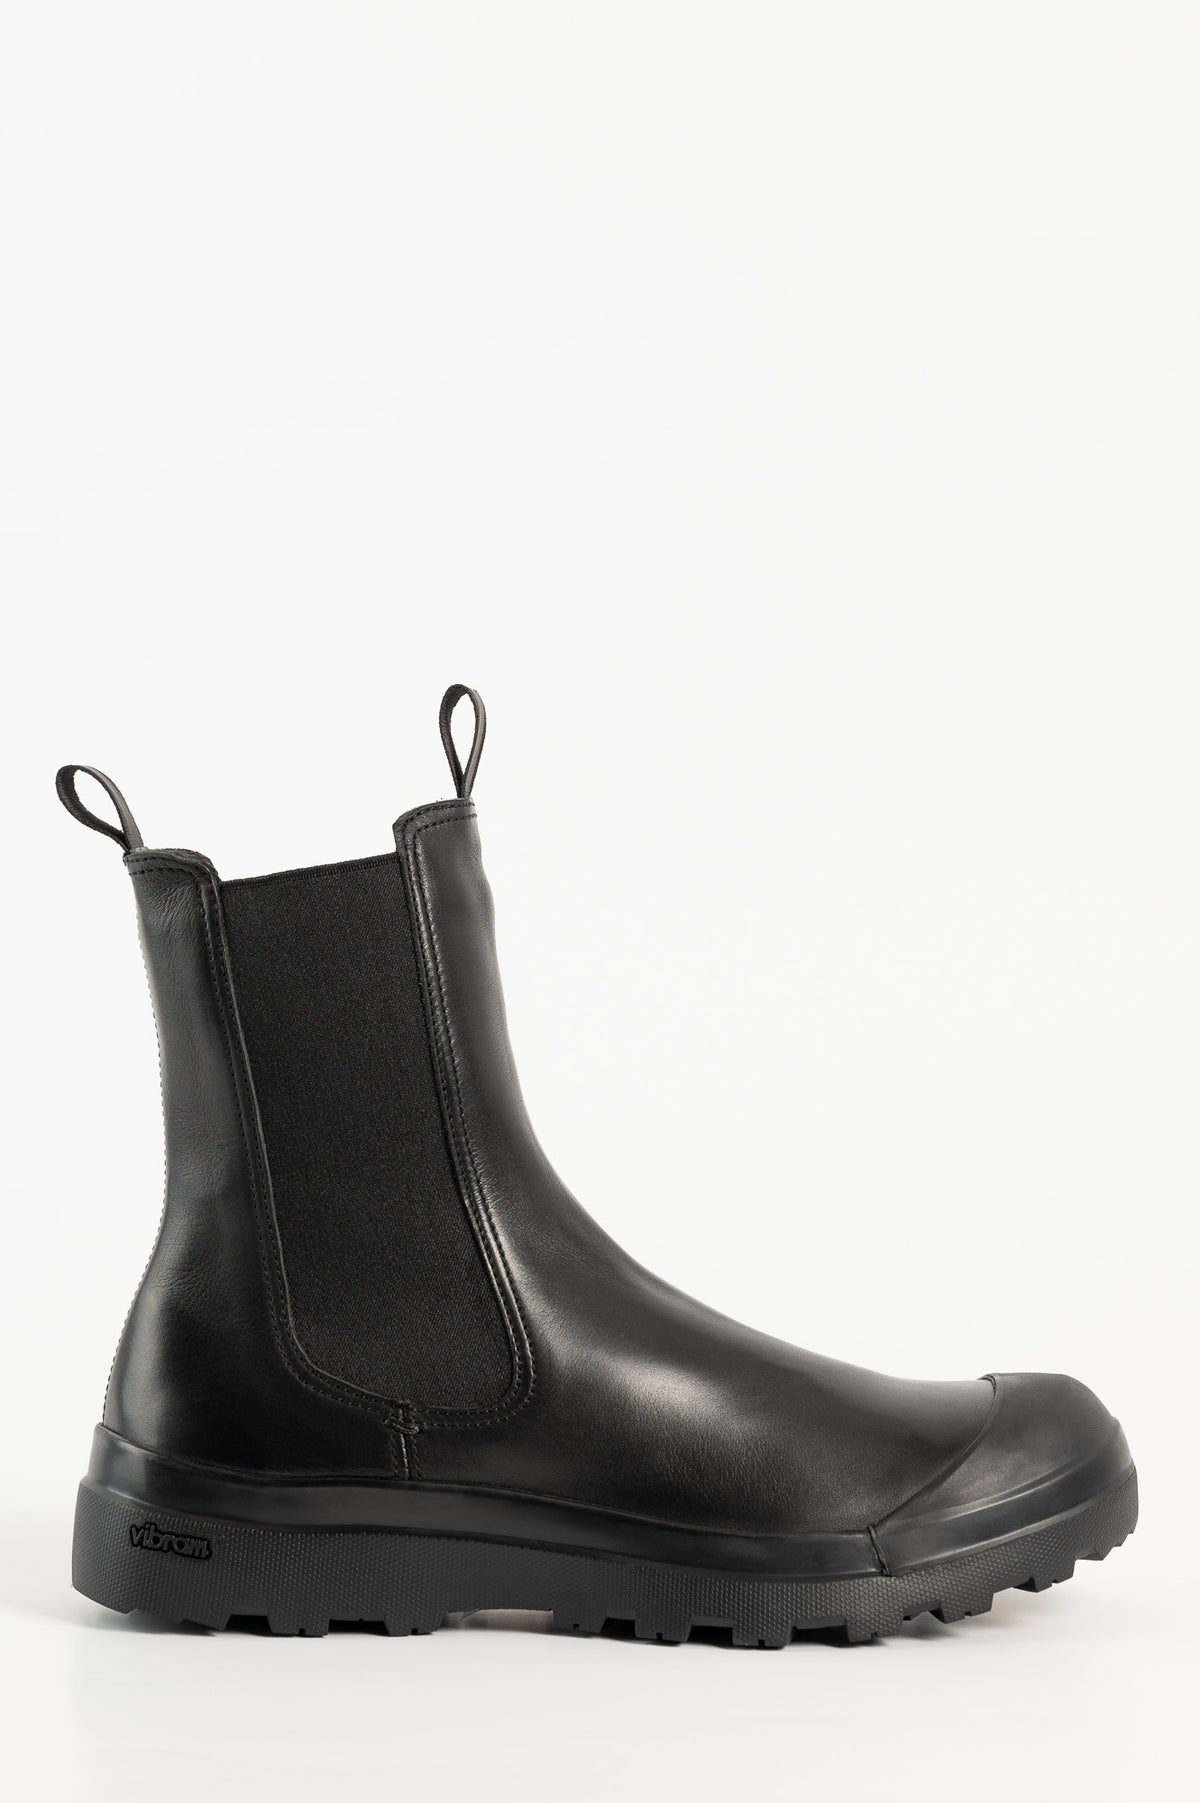 Warm Lined Boot 106 | Black Leather